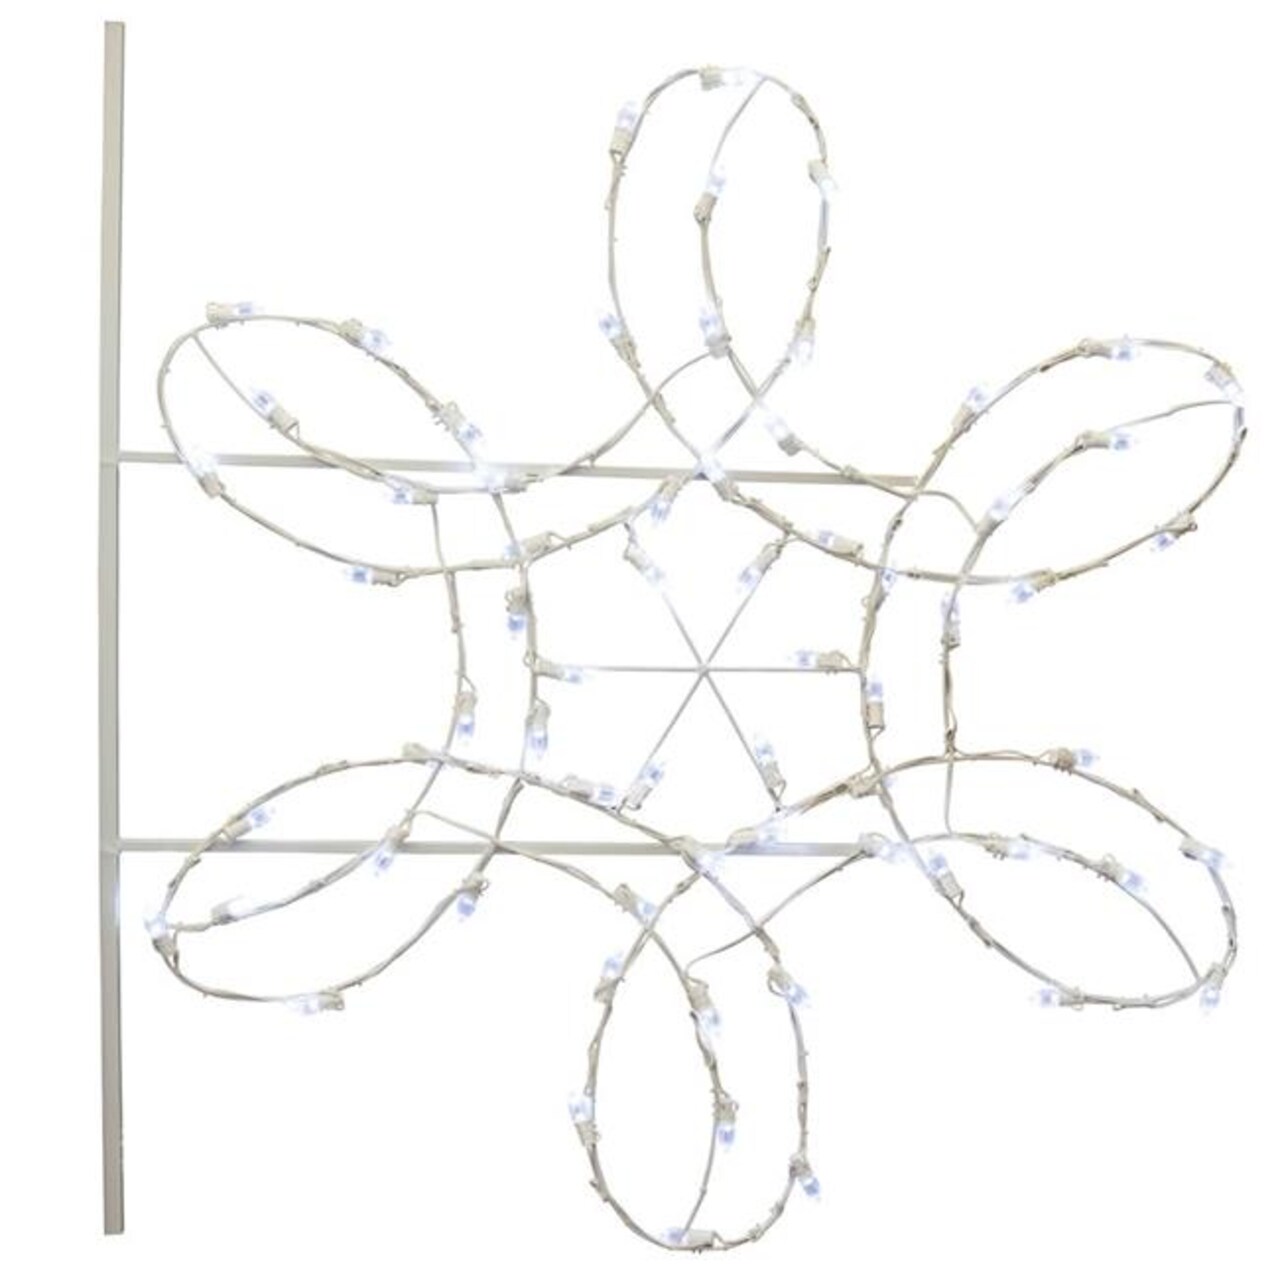 4.5 ft. Double Spiral Snowflake Commercial Pole Decoration with C7 66 LED Light